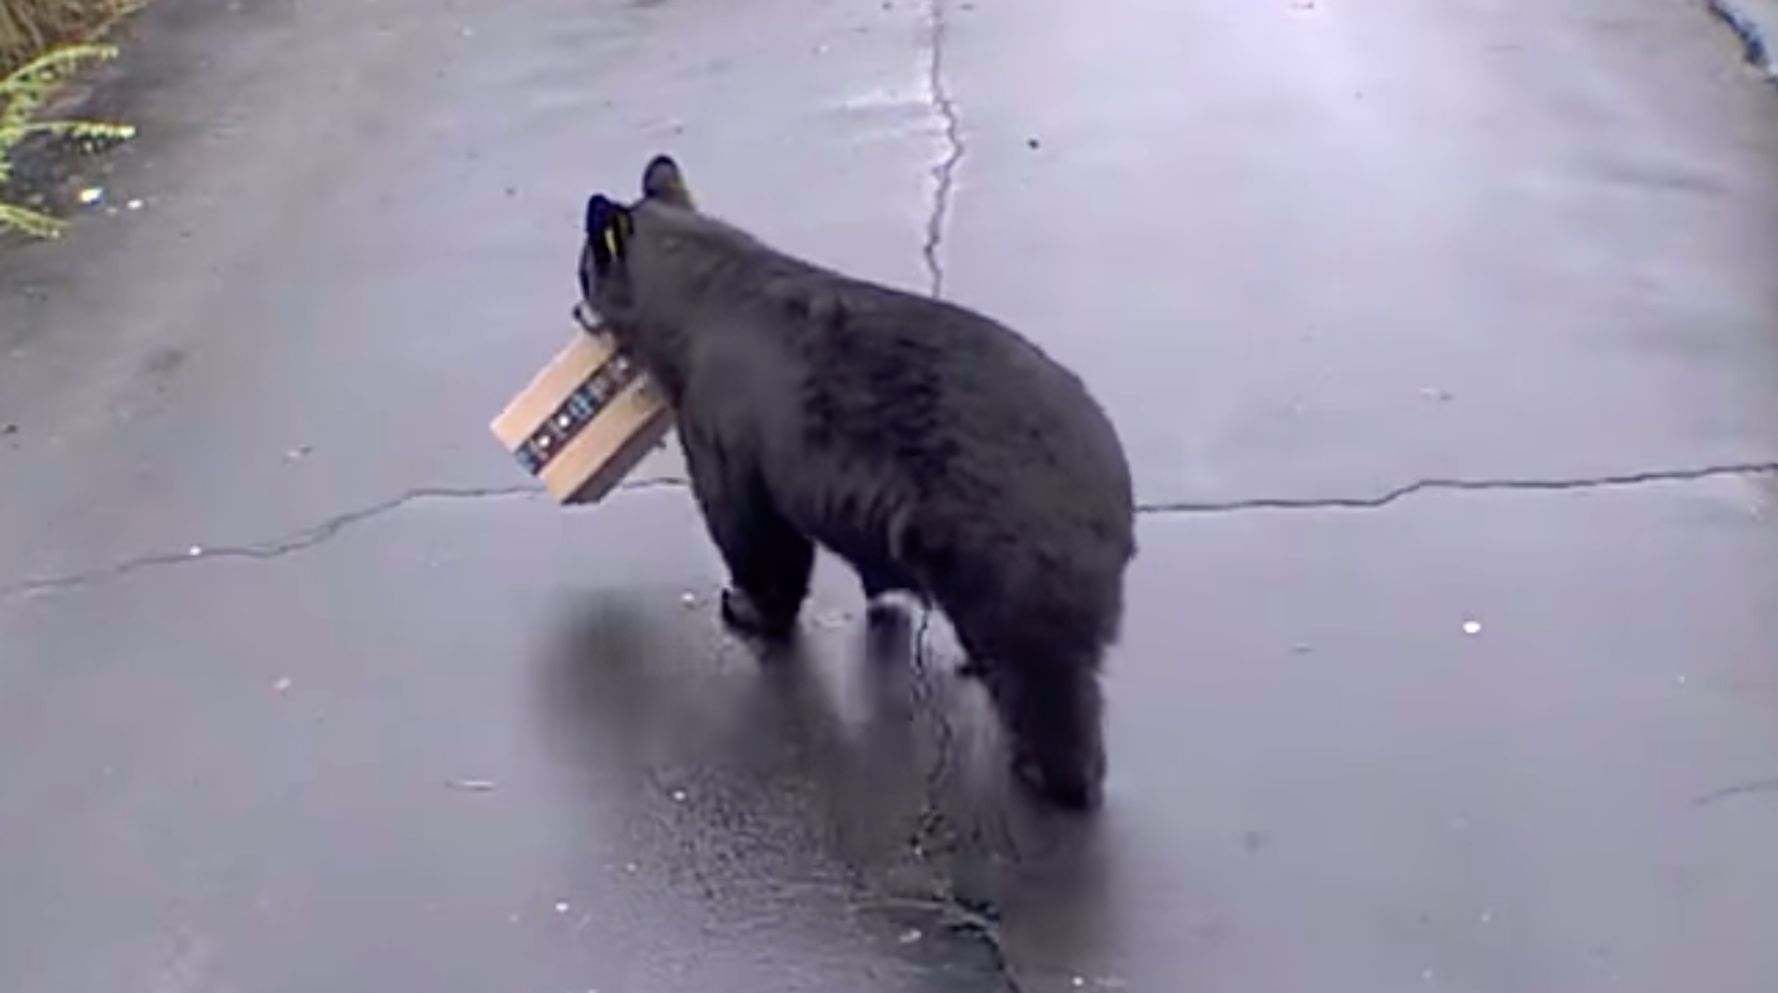 Big, Furry Porch Thief Takes Off With Package In 'Hysterical' Surveillance Video